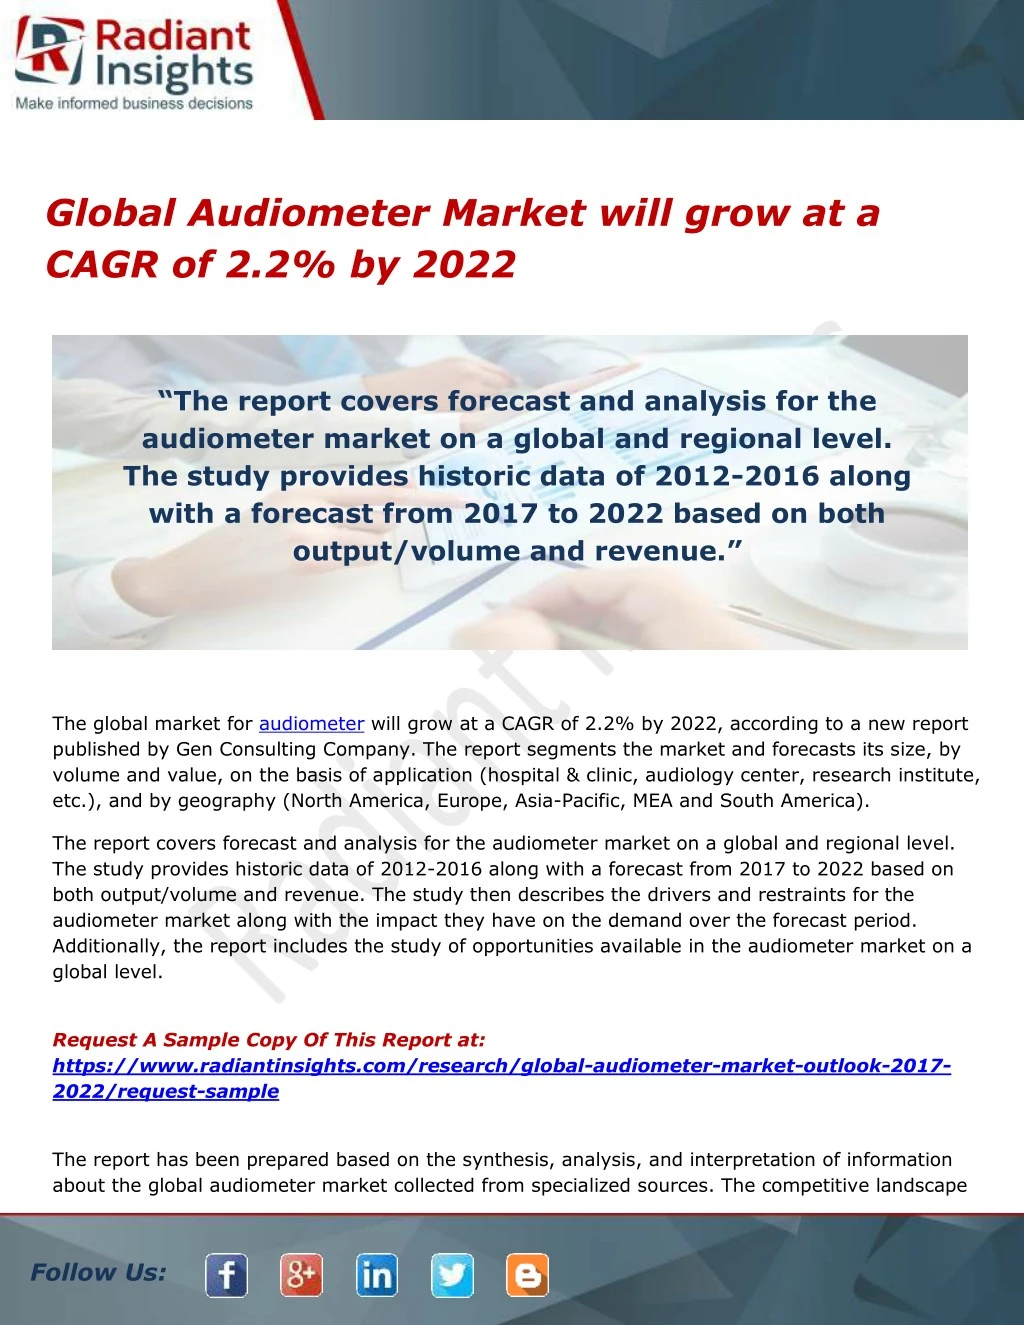 global audiometer market will grow at a cagr